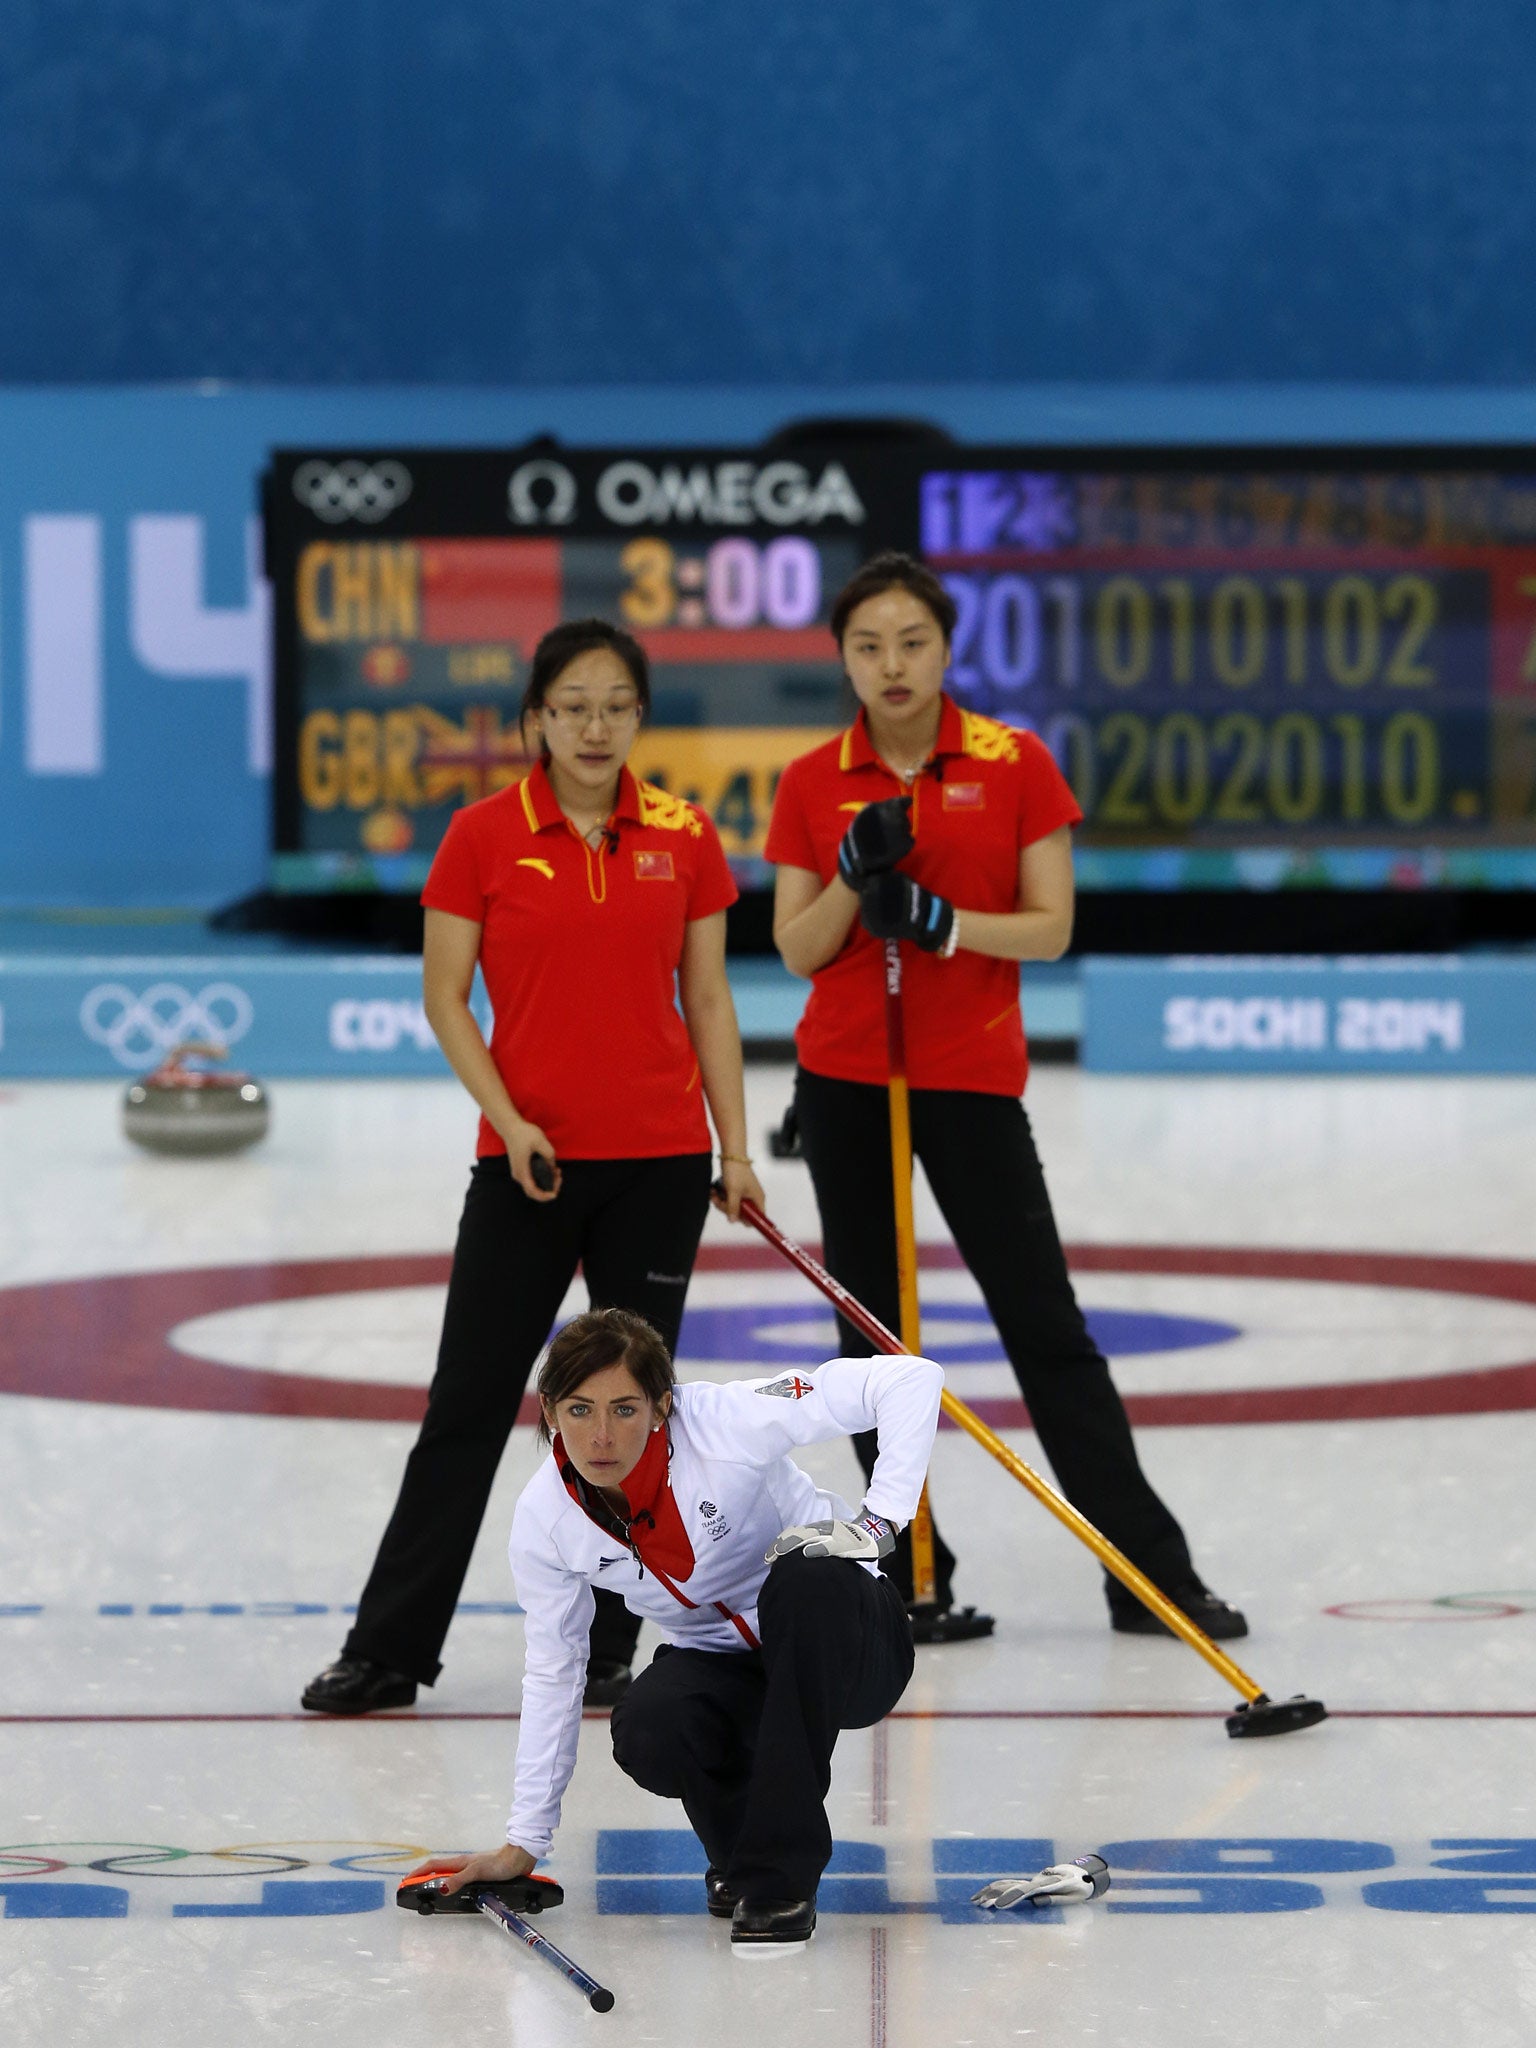 Eve Muirhead in action against China